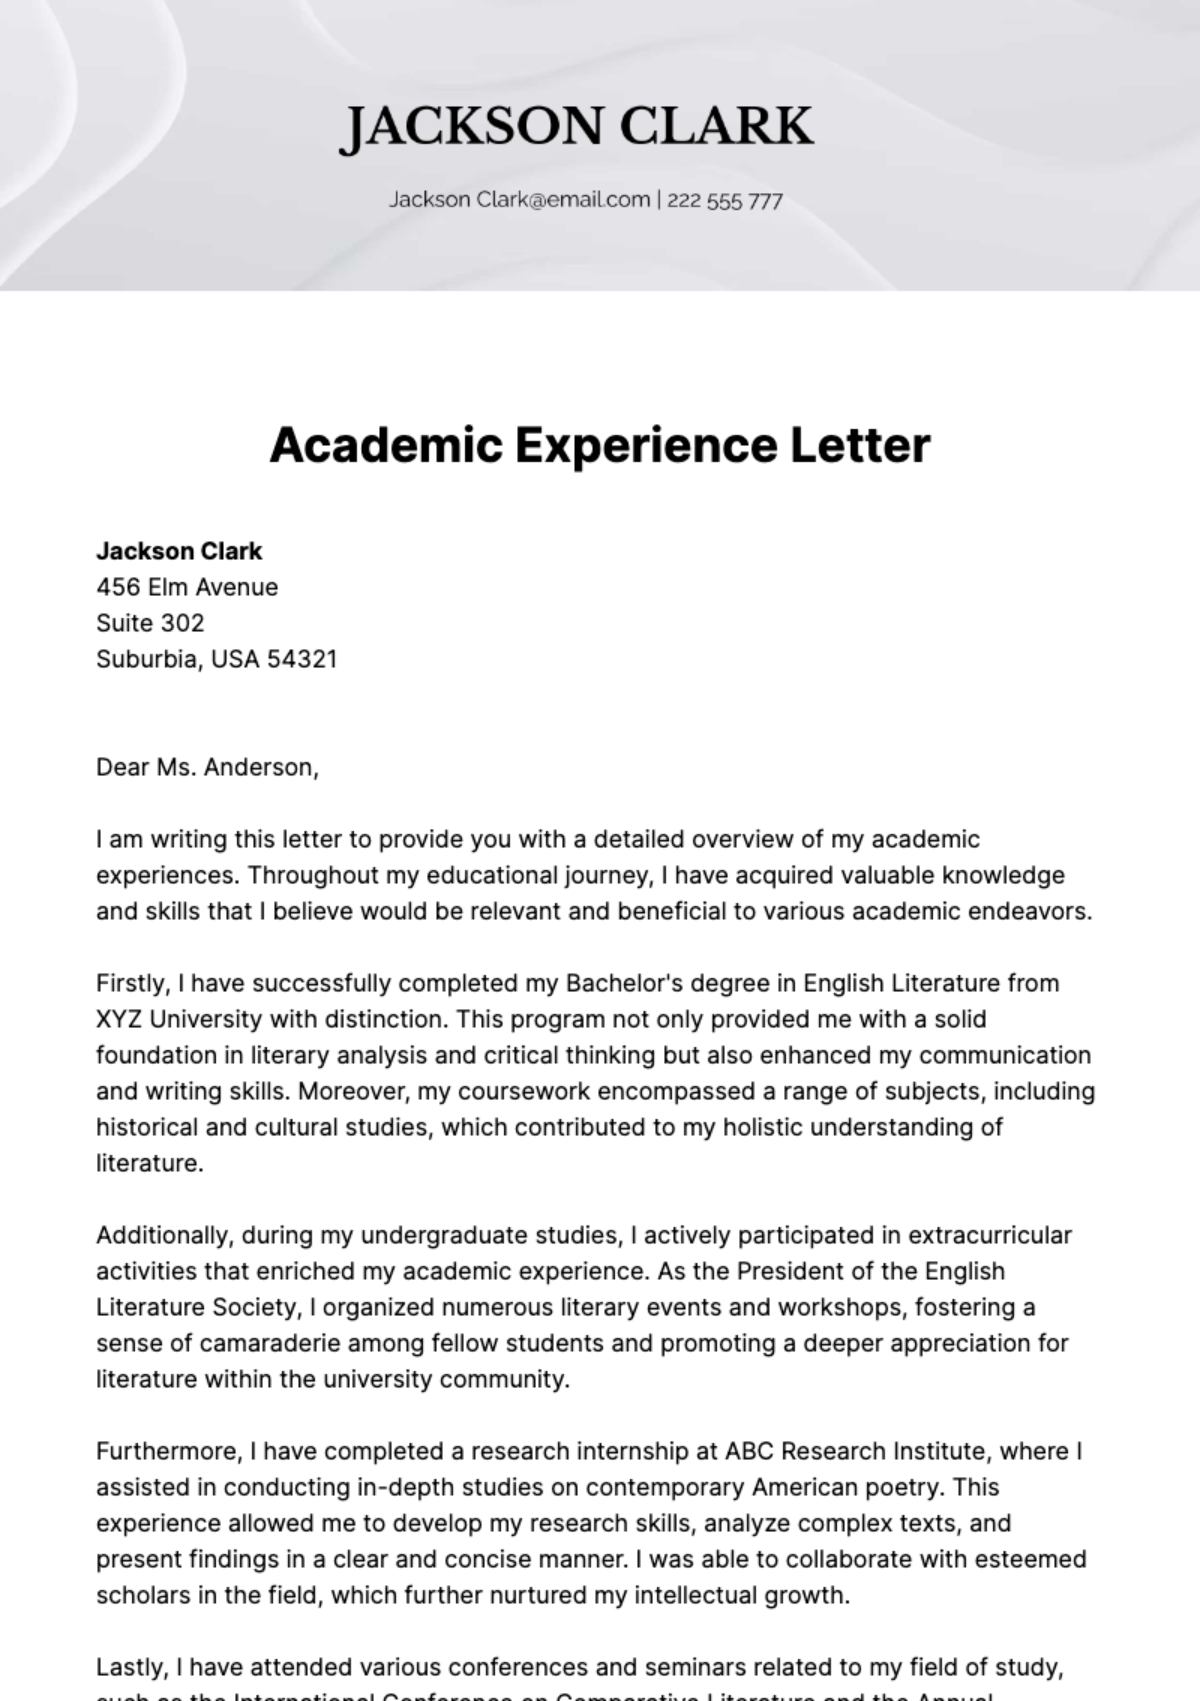 Academic Experience Letter Template